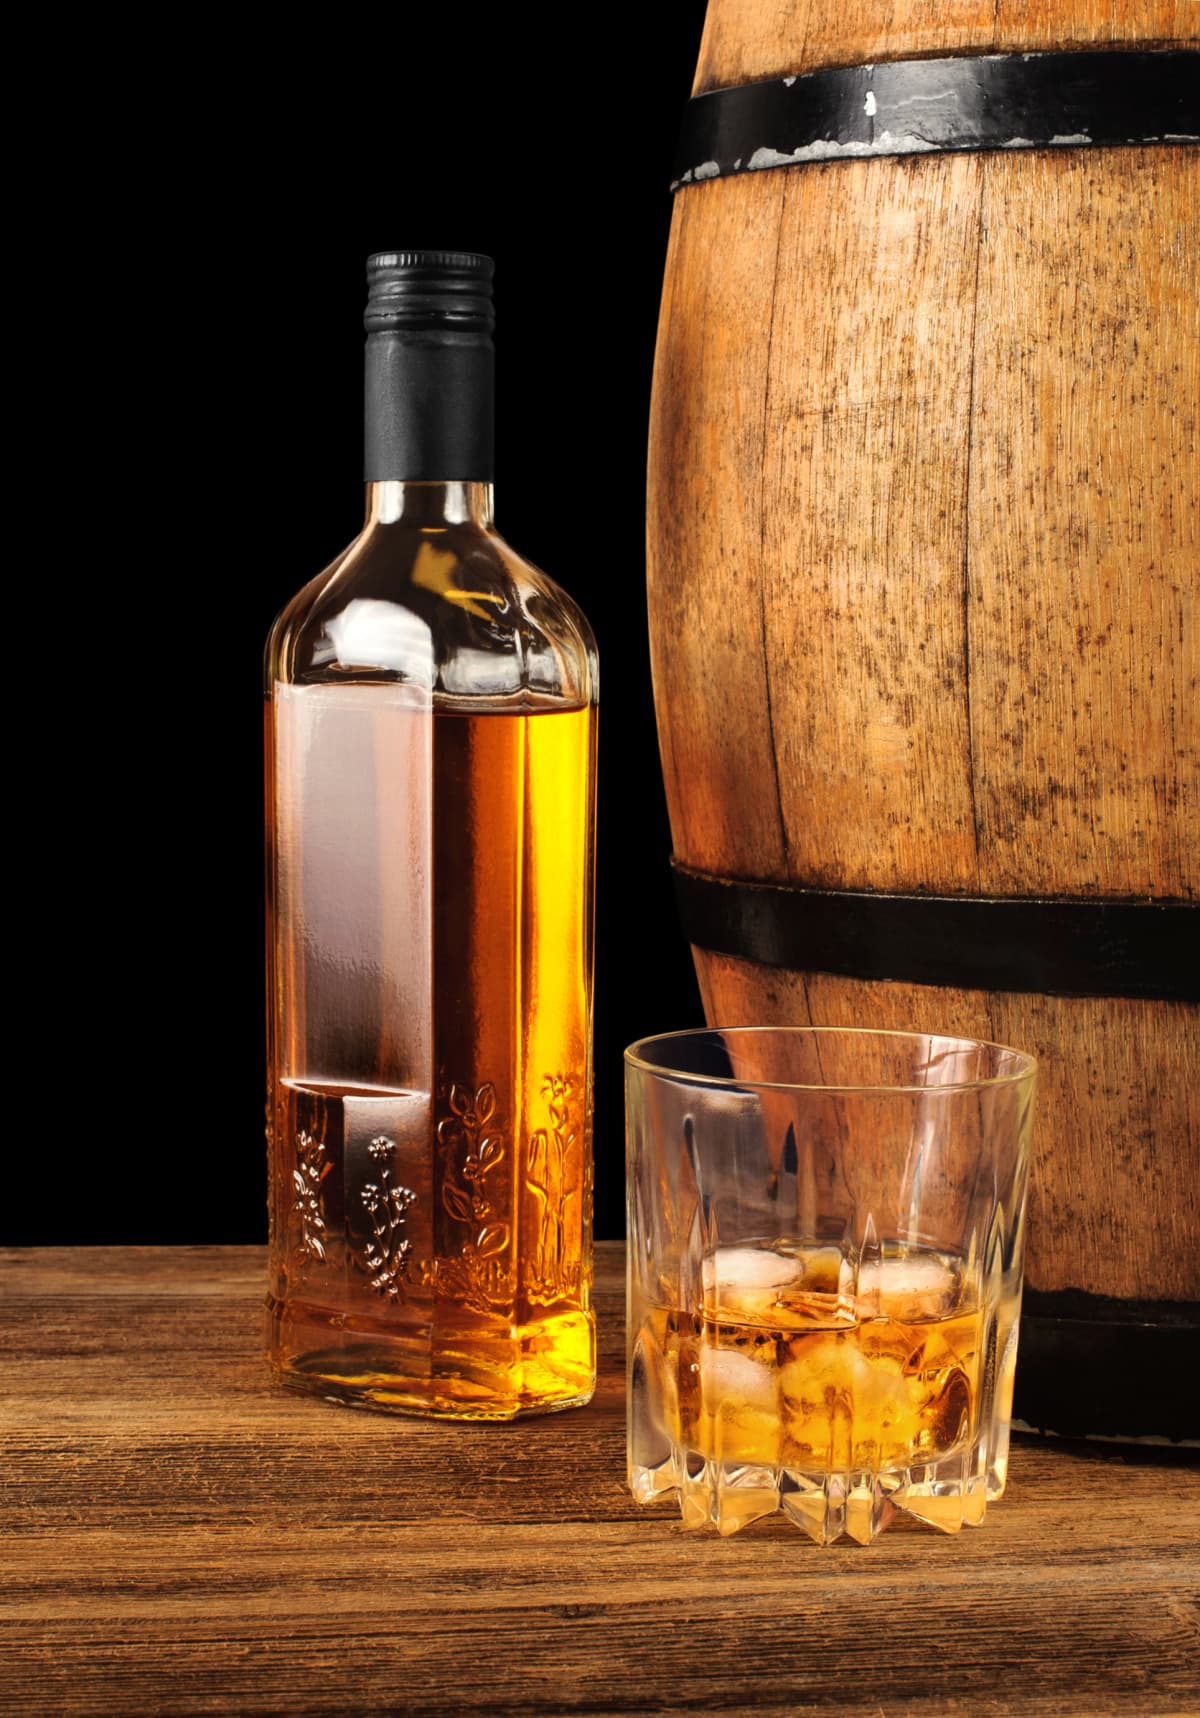 Whiskey bottle and glass with oak barrel